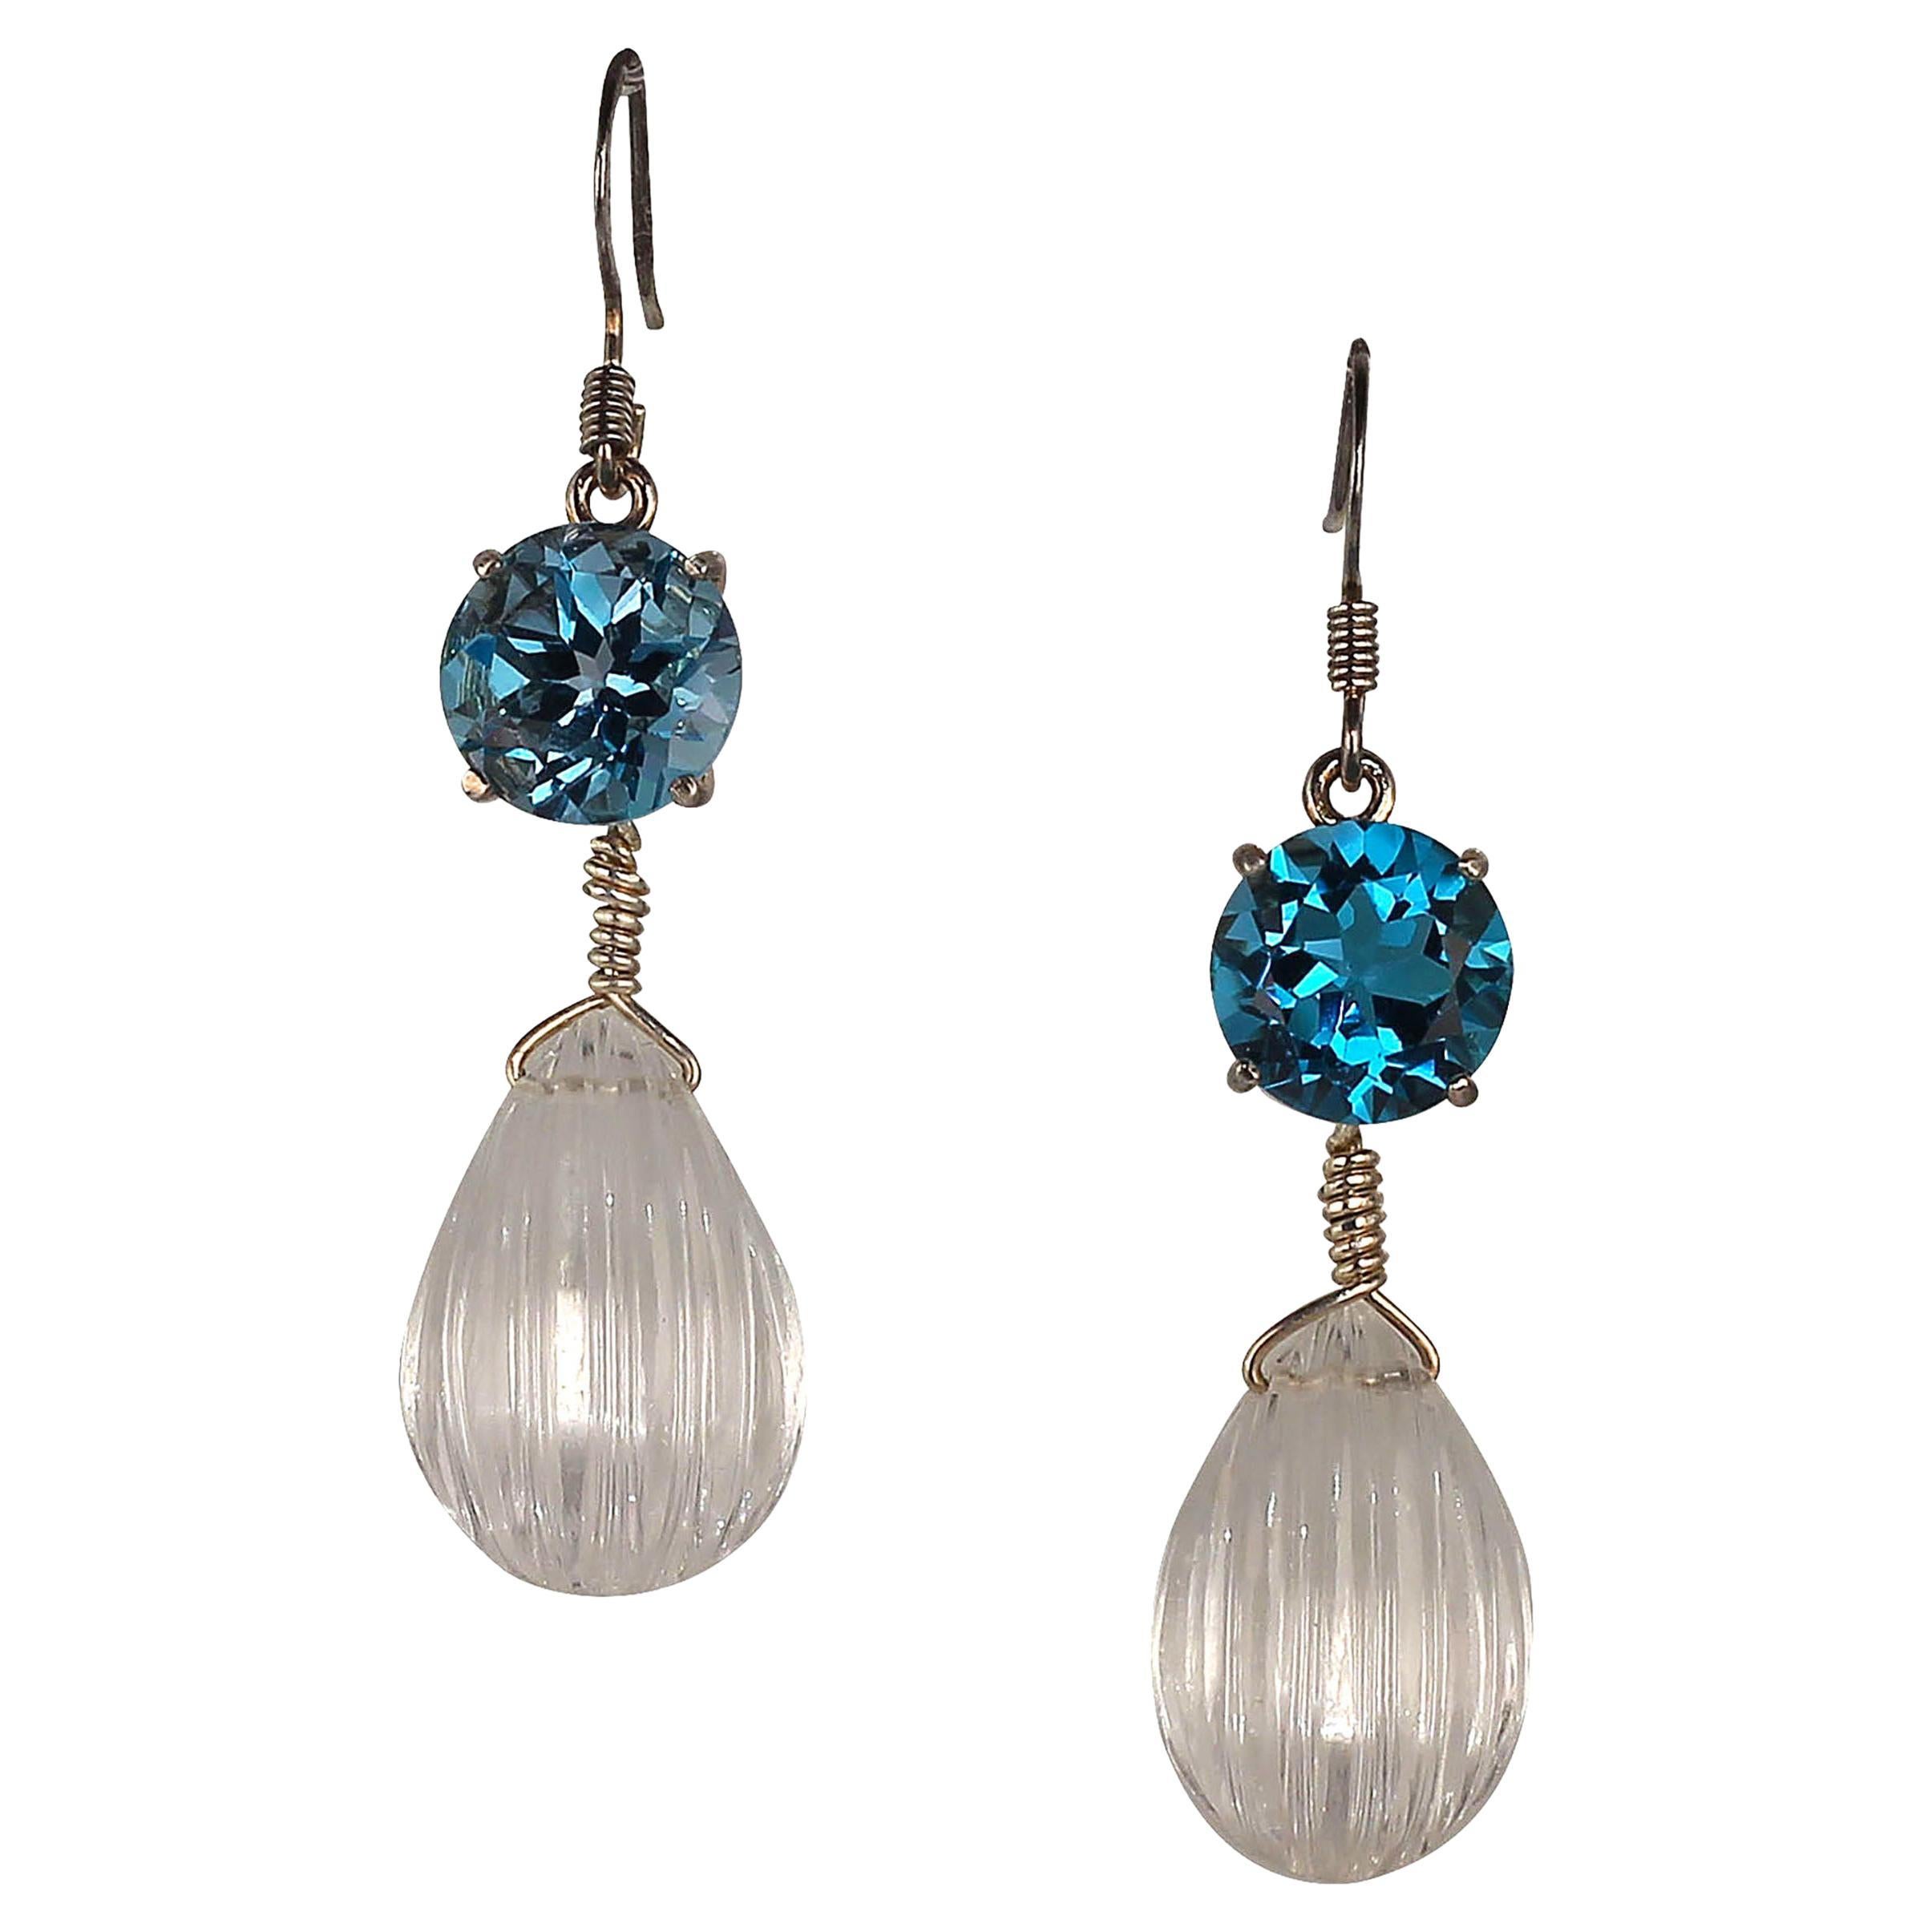 AJD Sparkling Blue Topaz and Quartz Crystal Earrings    Great Gift!!